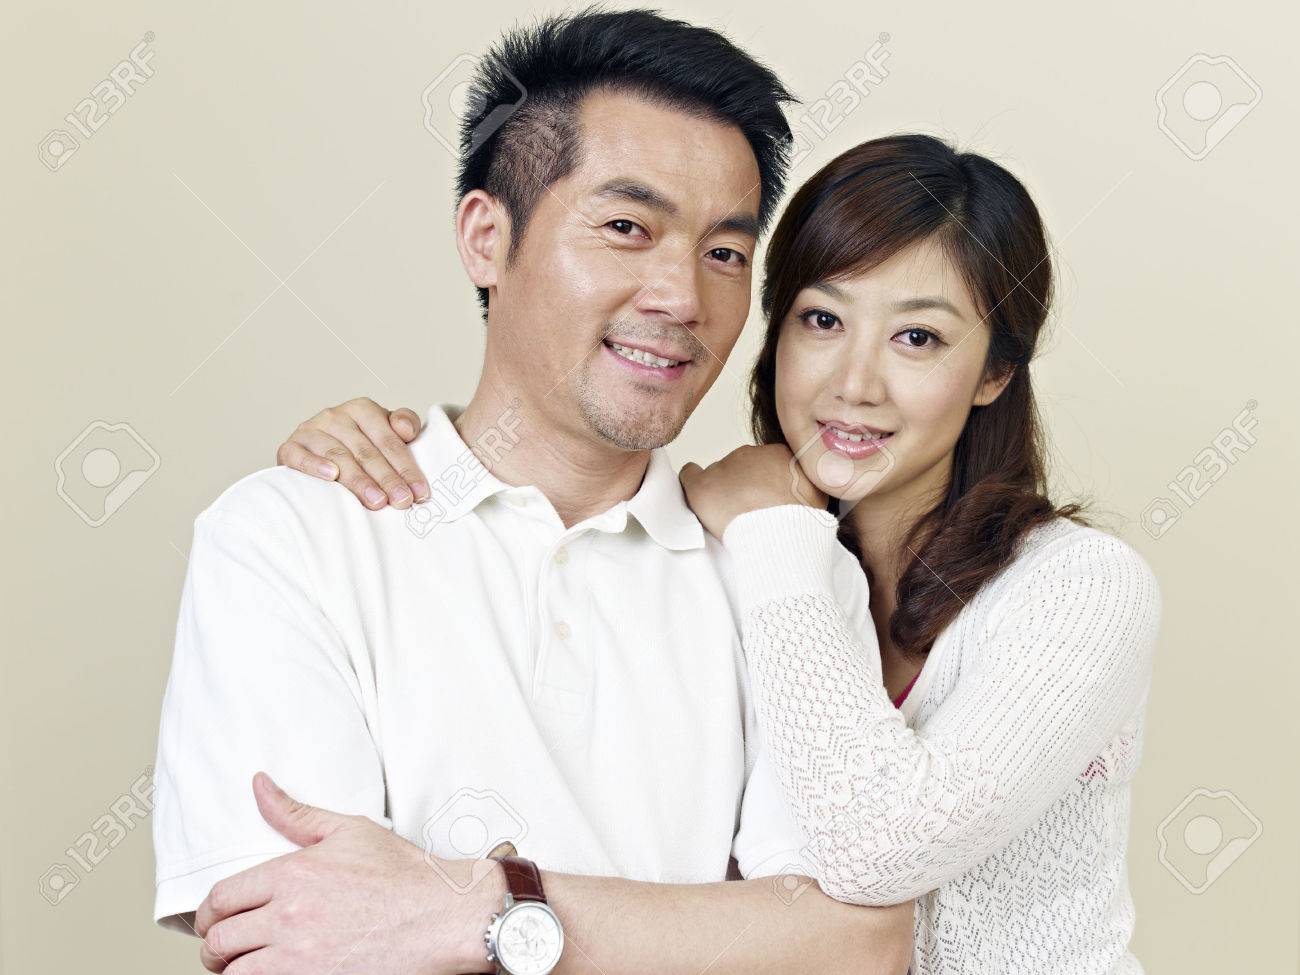 22349156-portrait-of-a-young-asian-couple.jpg